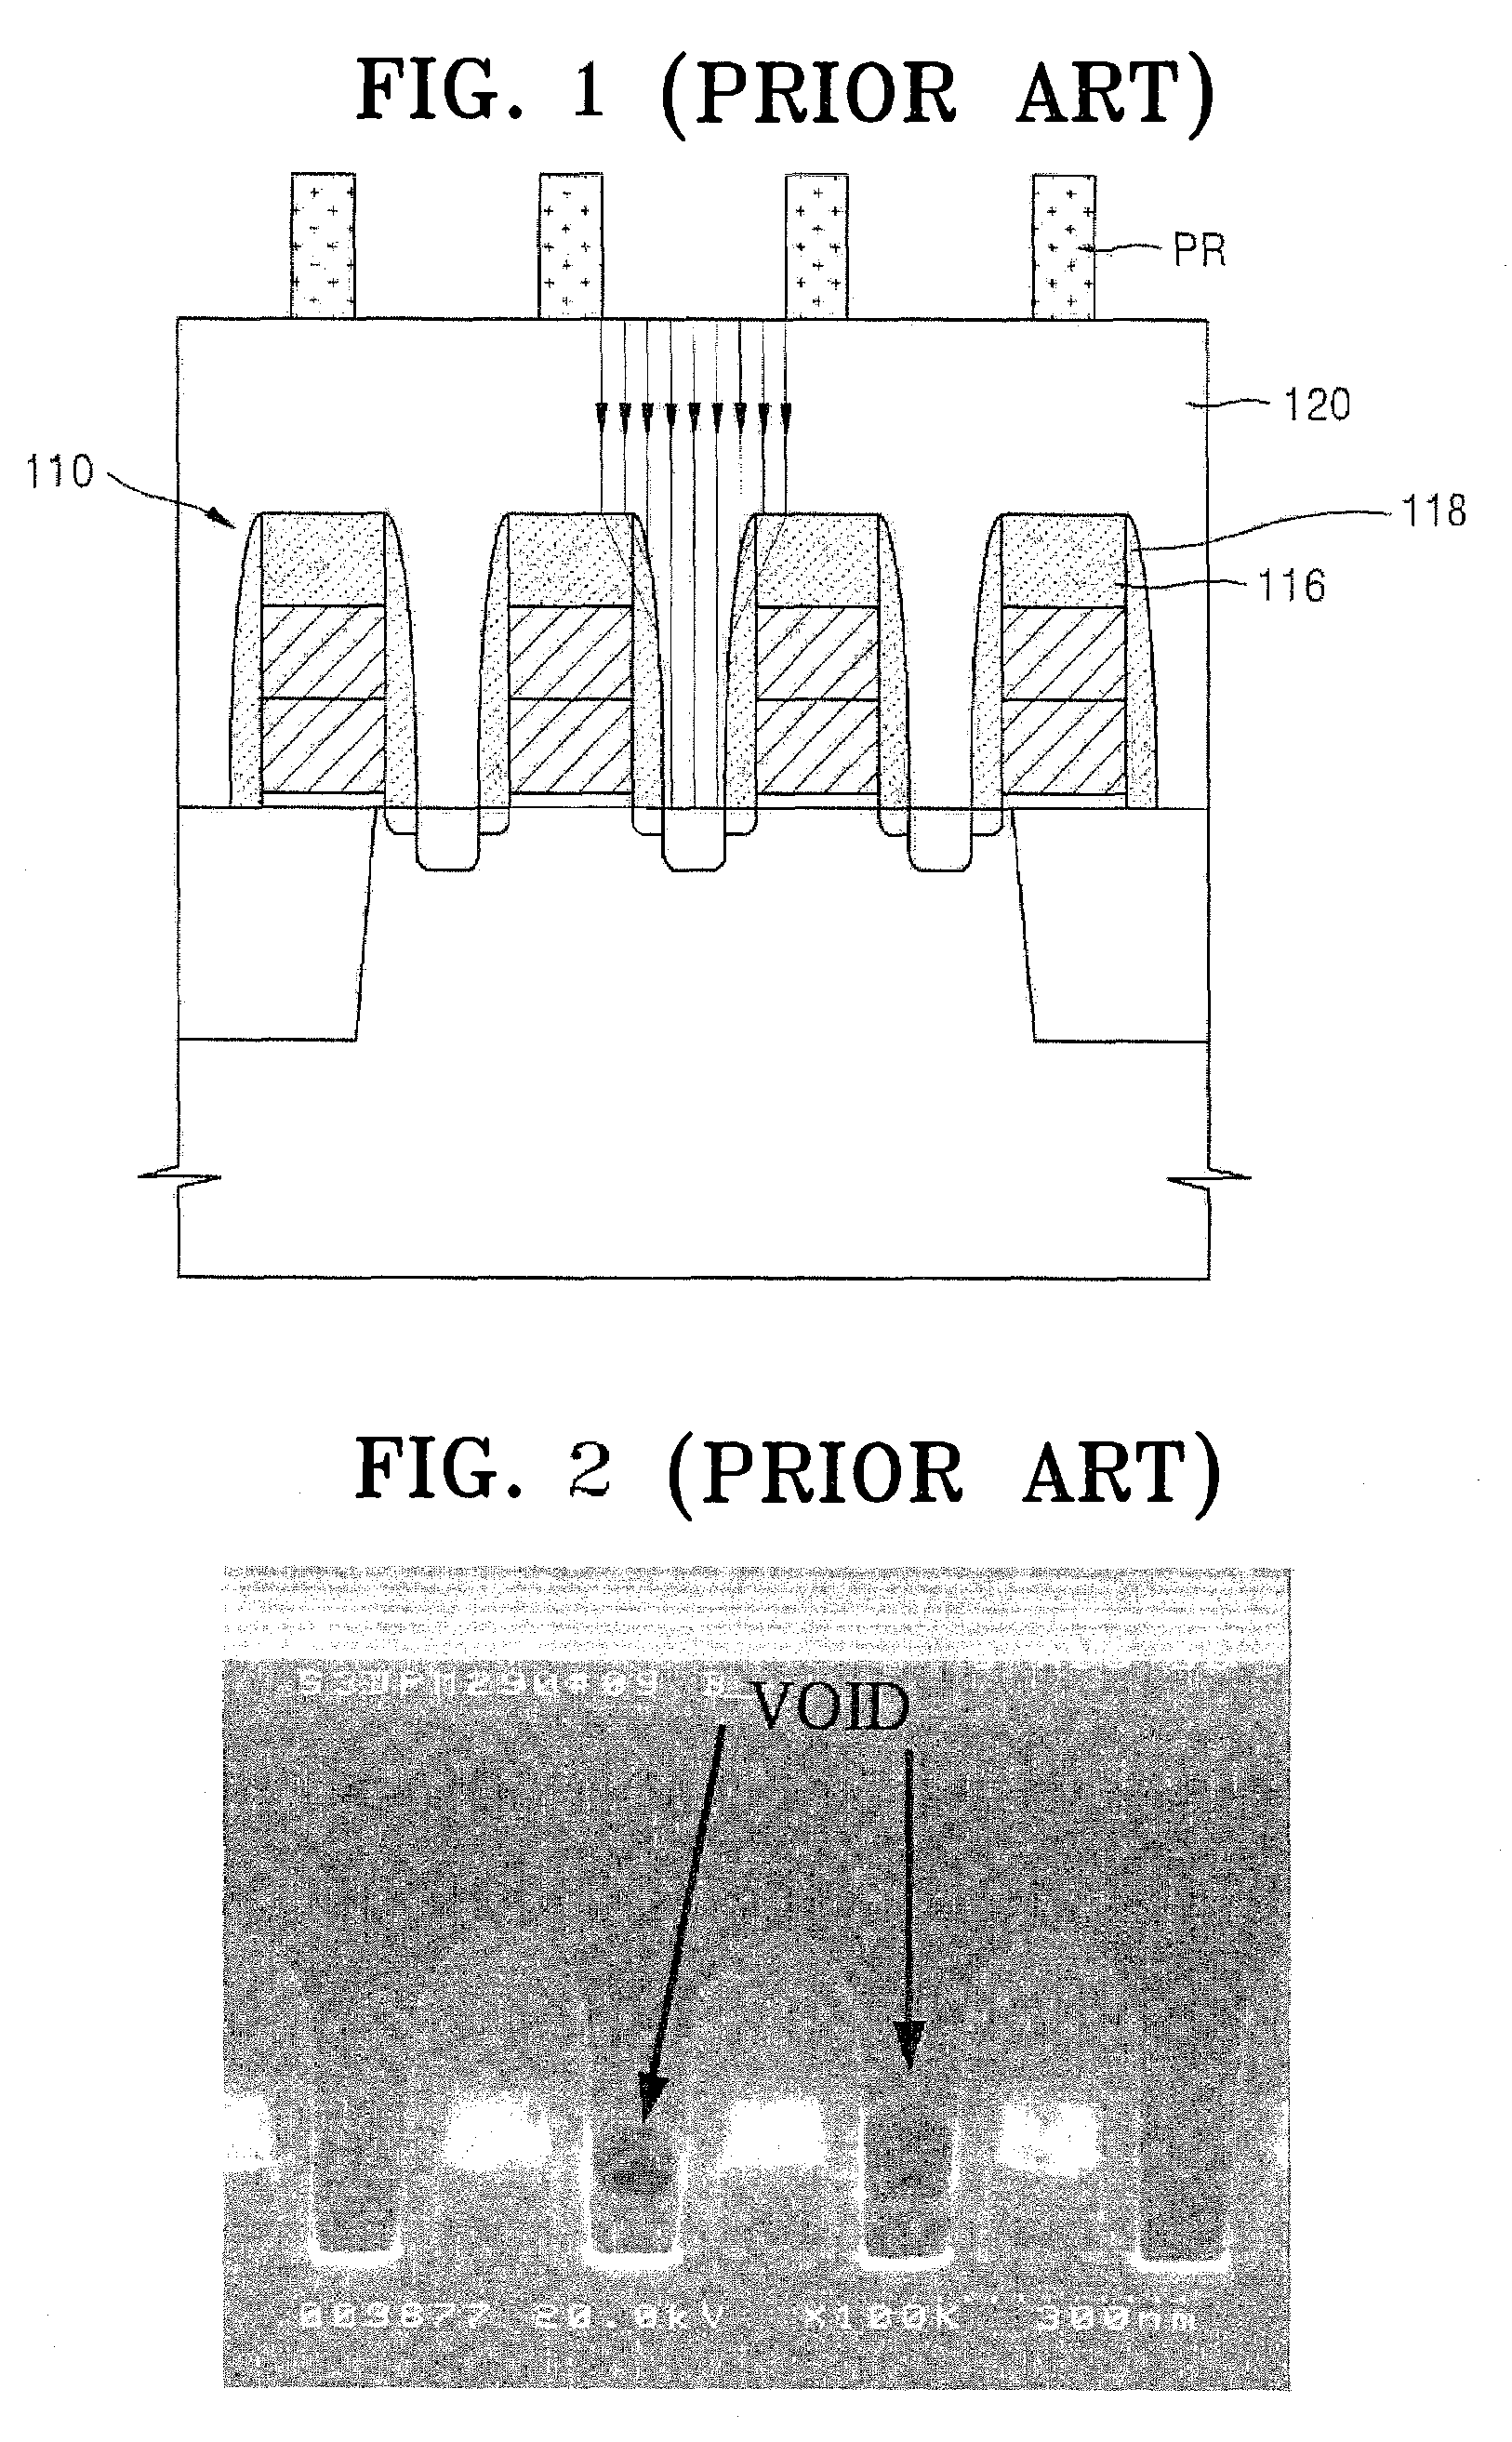 Method of manufacturing semiconductor device that includes forming self-aligned contact pad